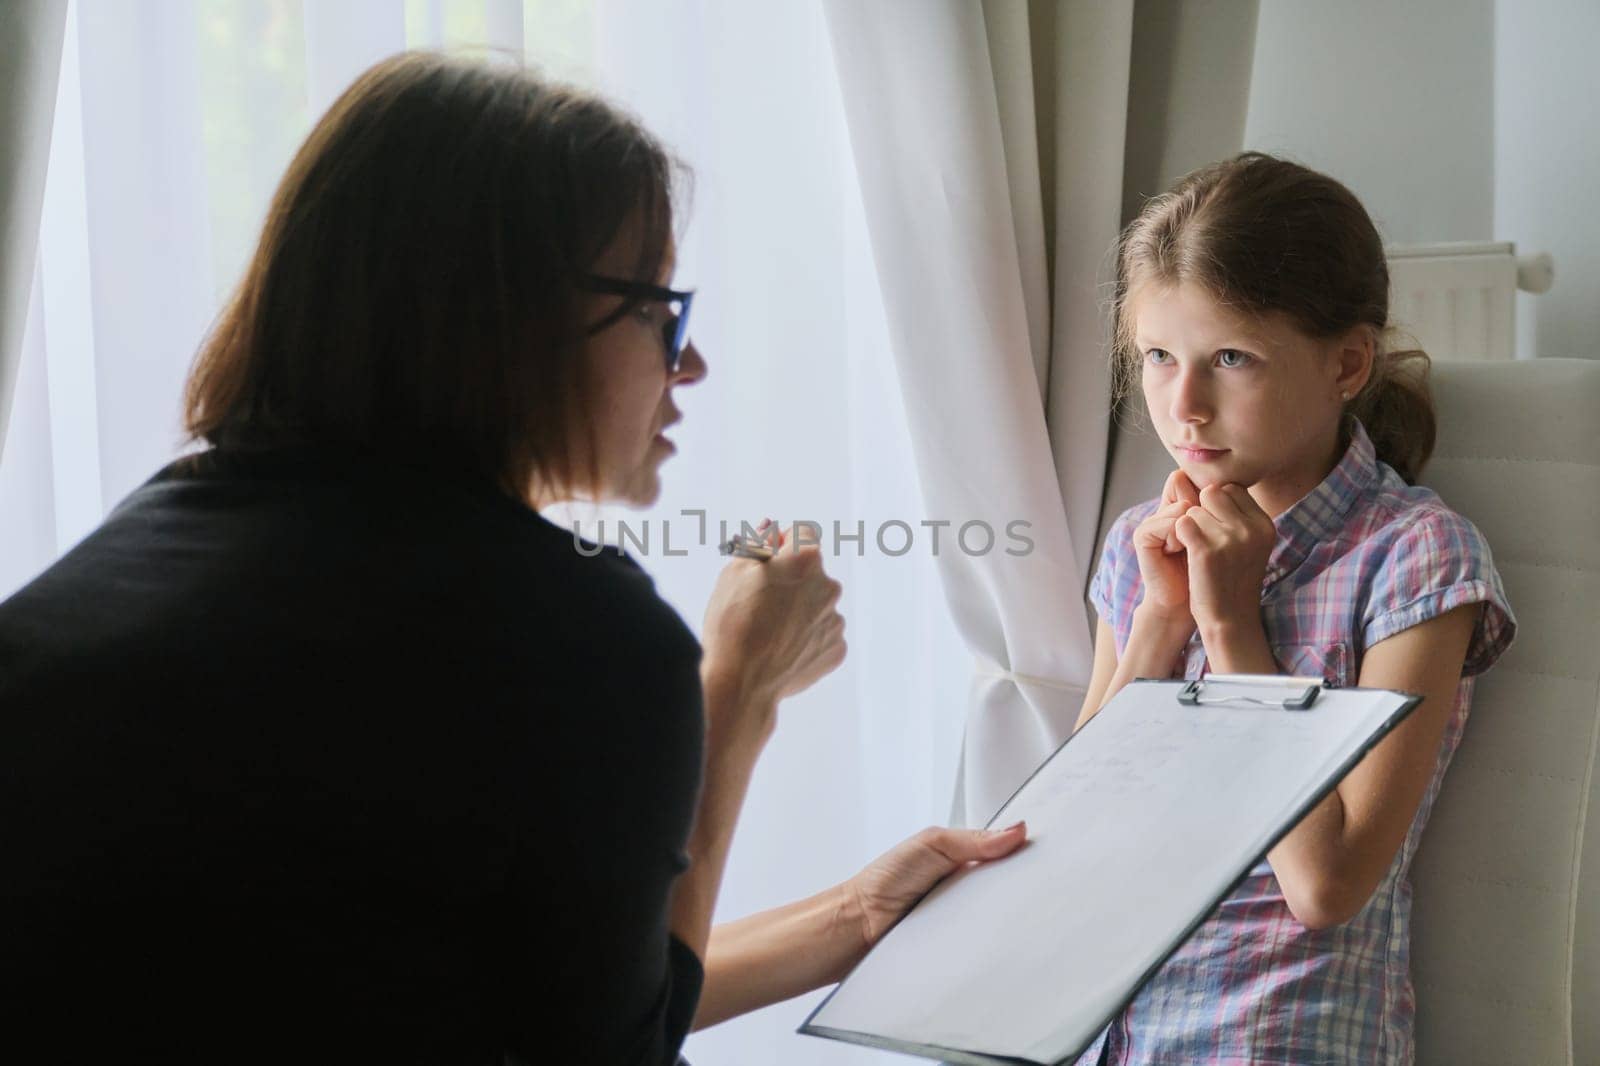 Meeting child girl with school counselor therapist. Children mental health, psychological assistance, counselor takes notes on clipboard